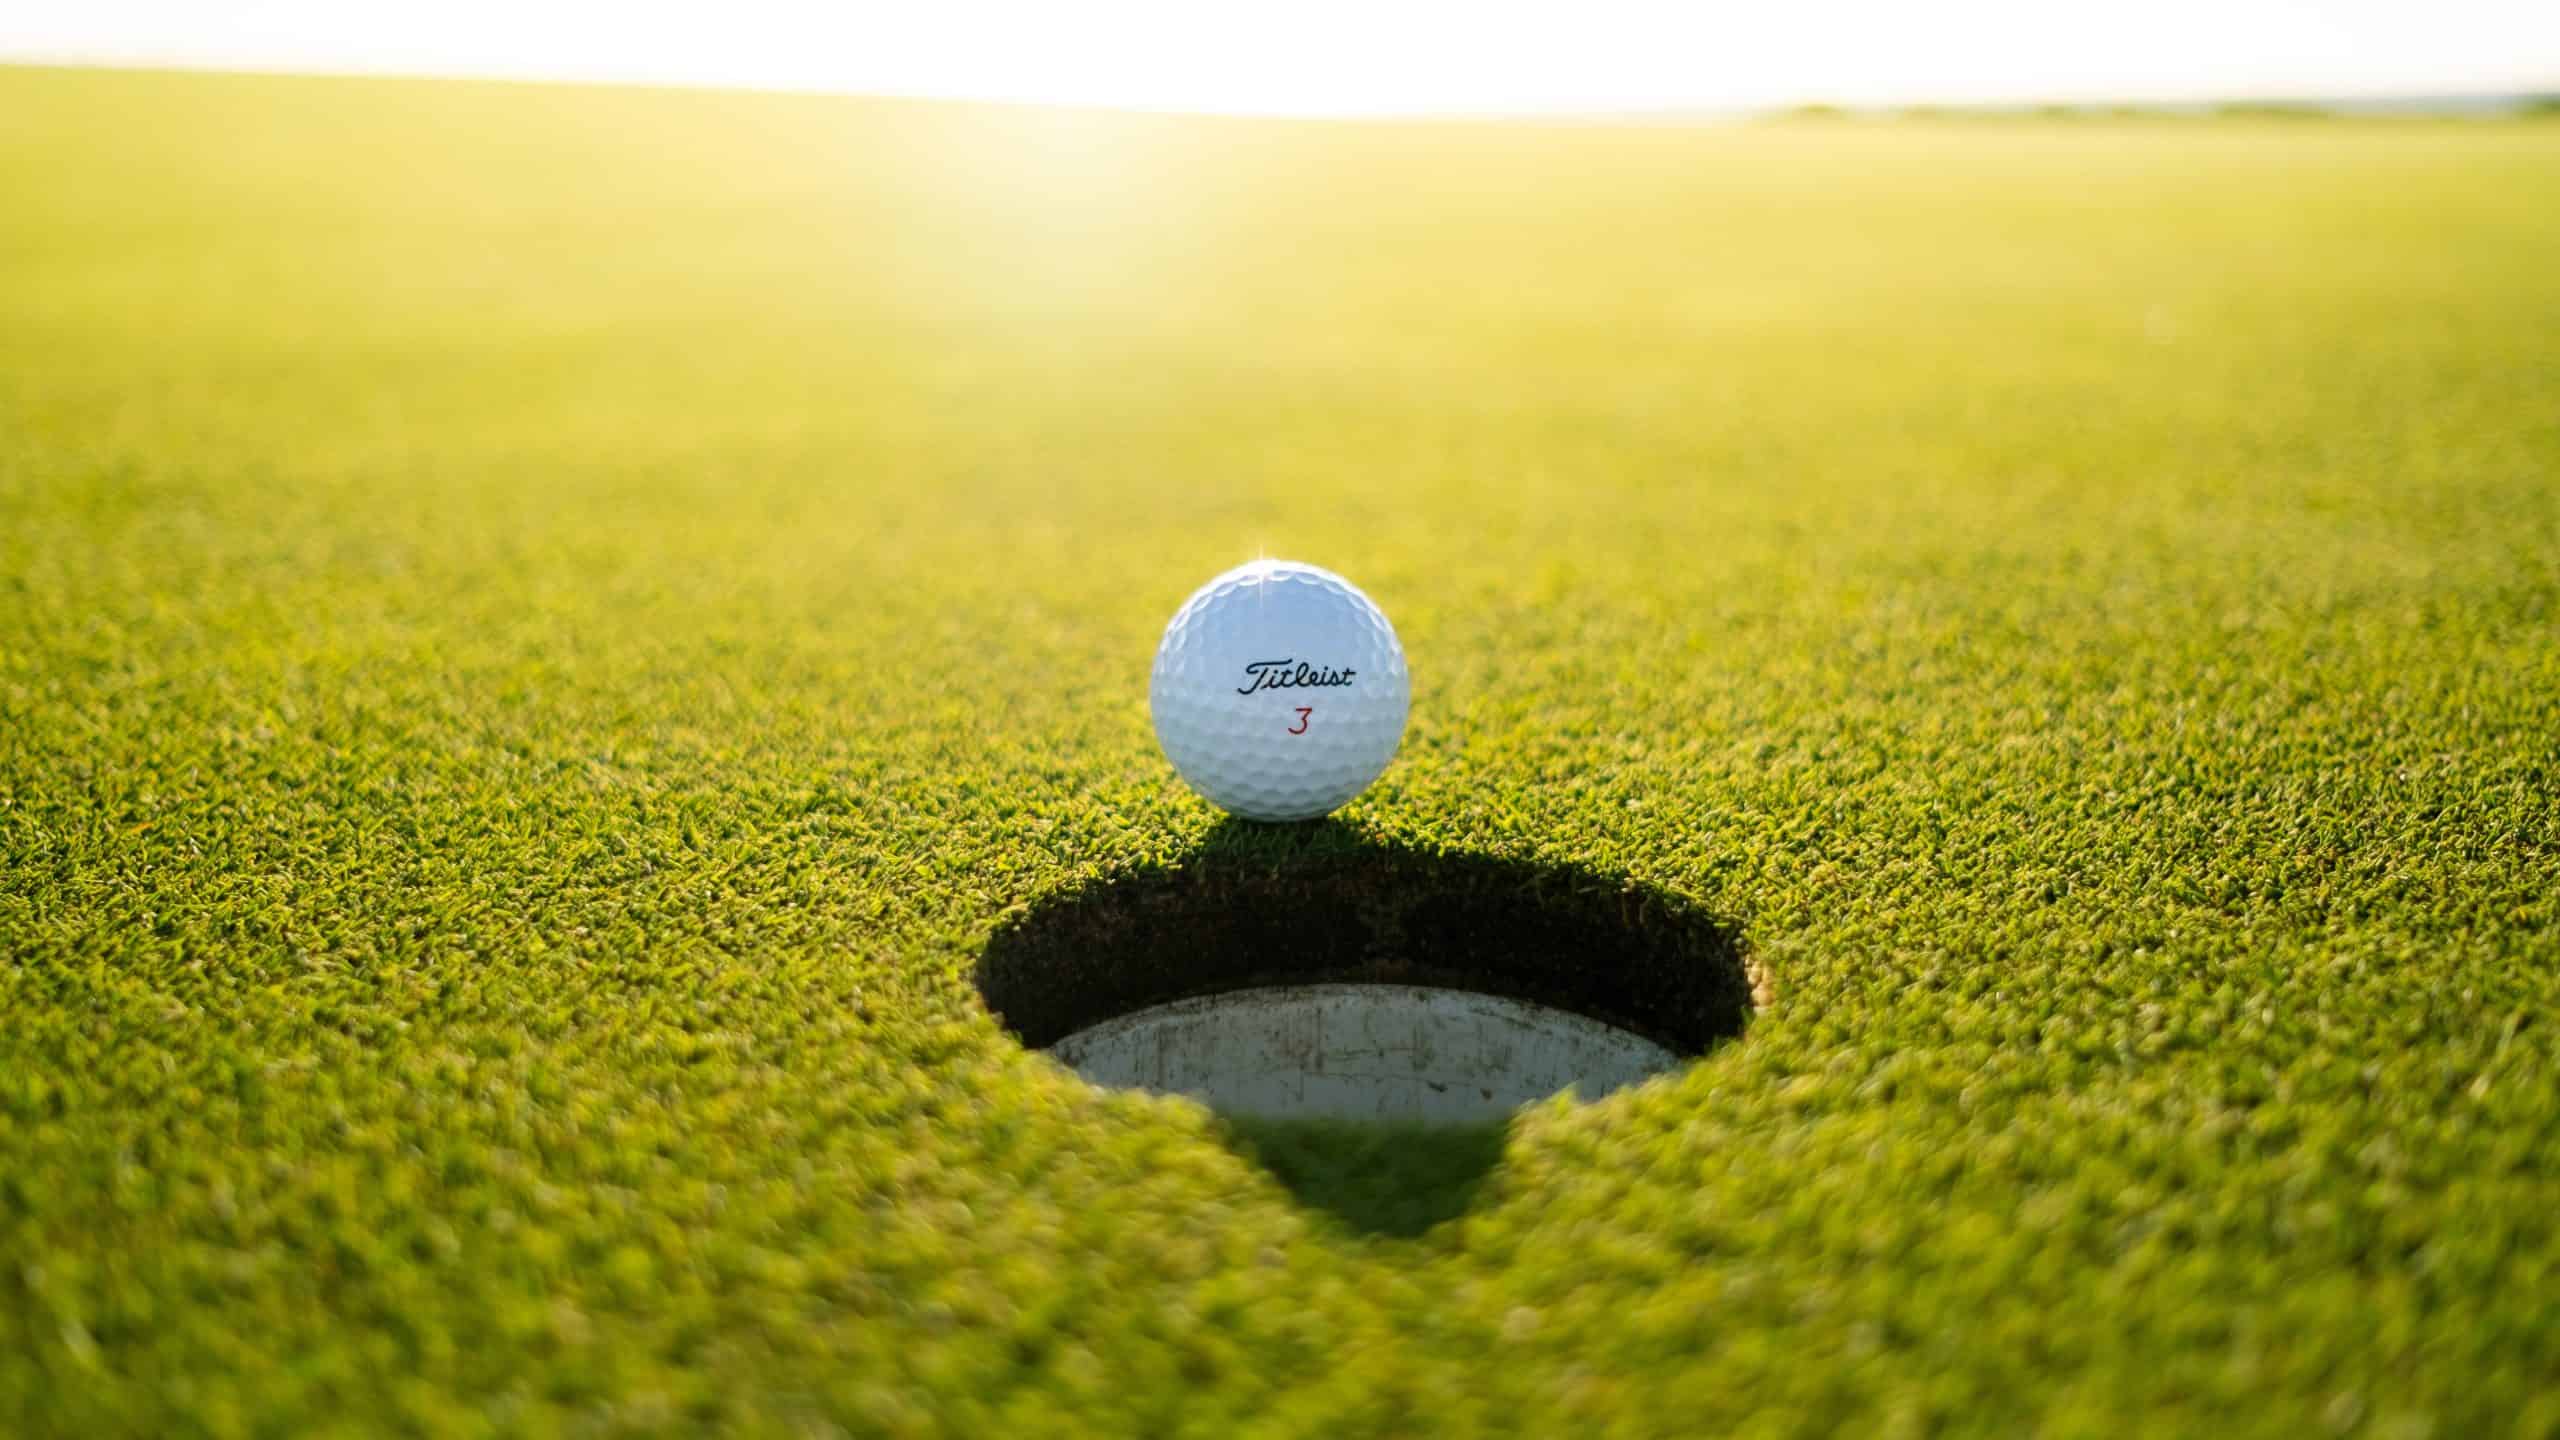 A golf ball sits in a hole on a green field.